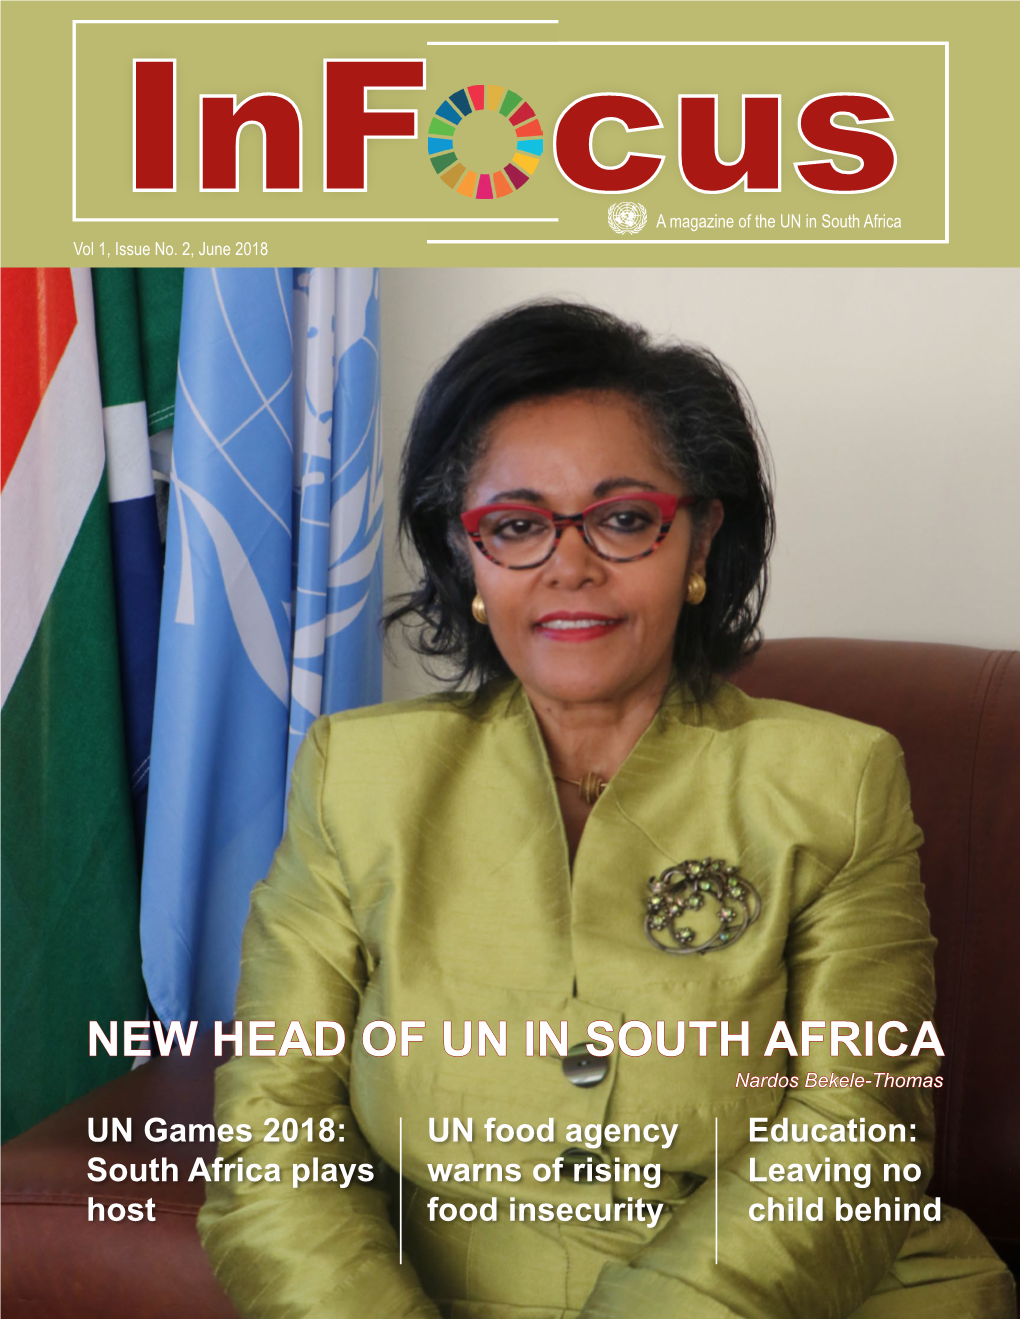 New Head of Un in South Africa